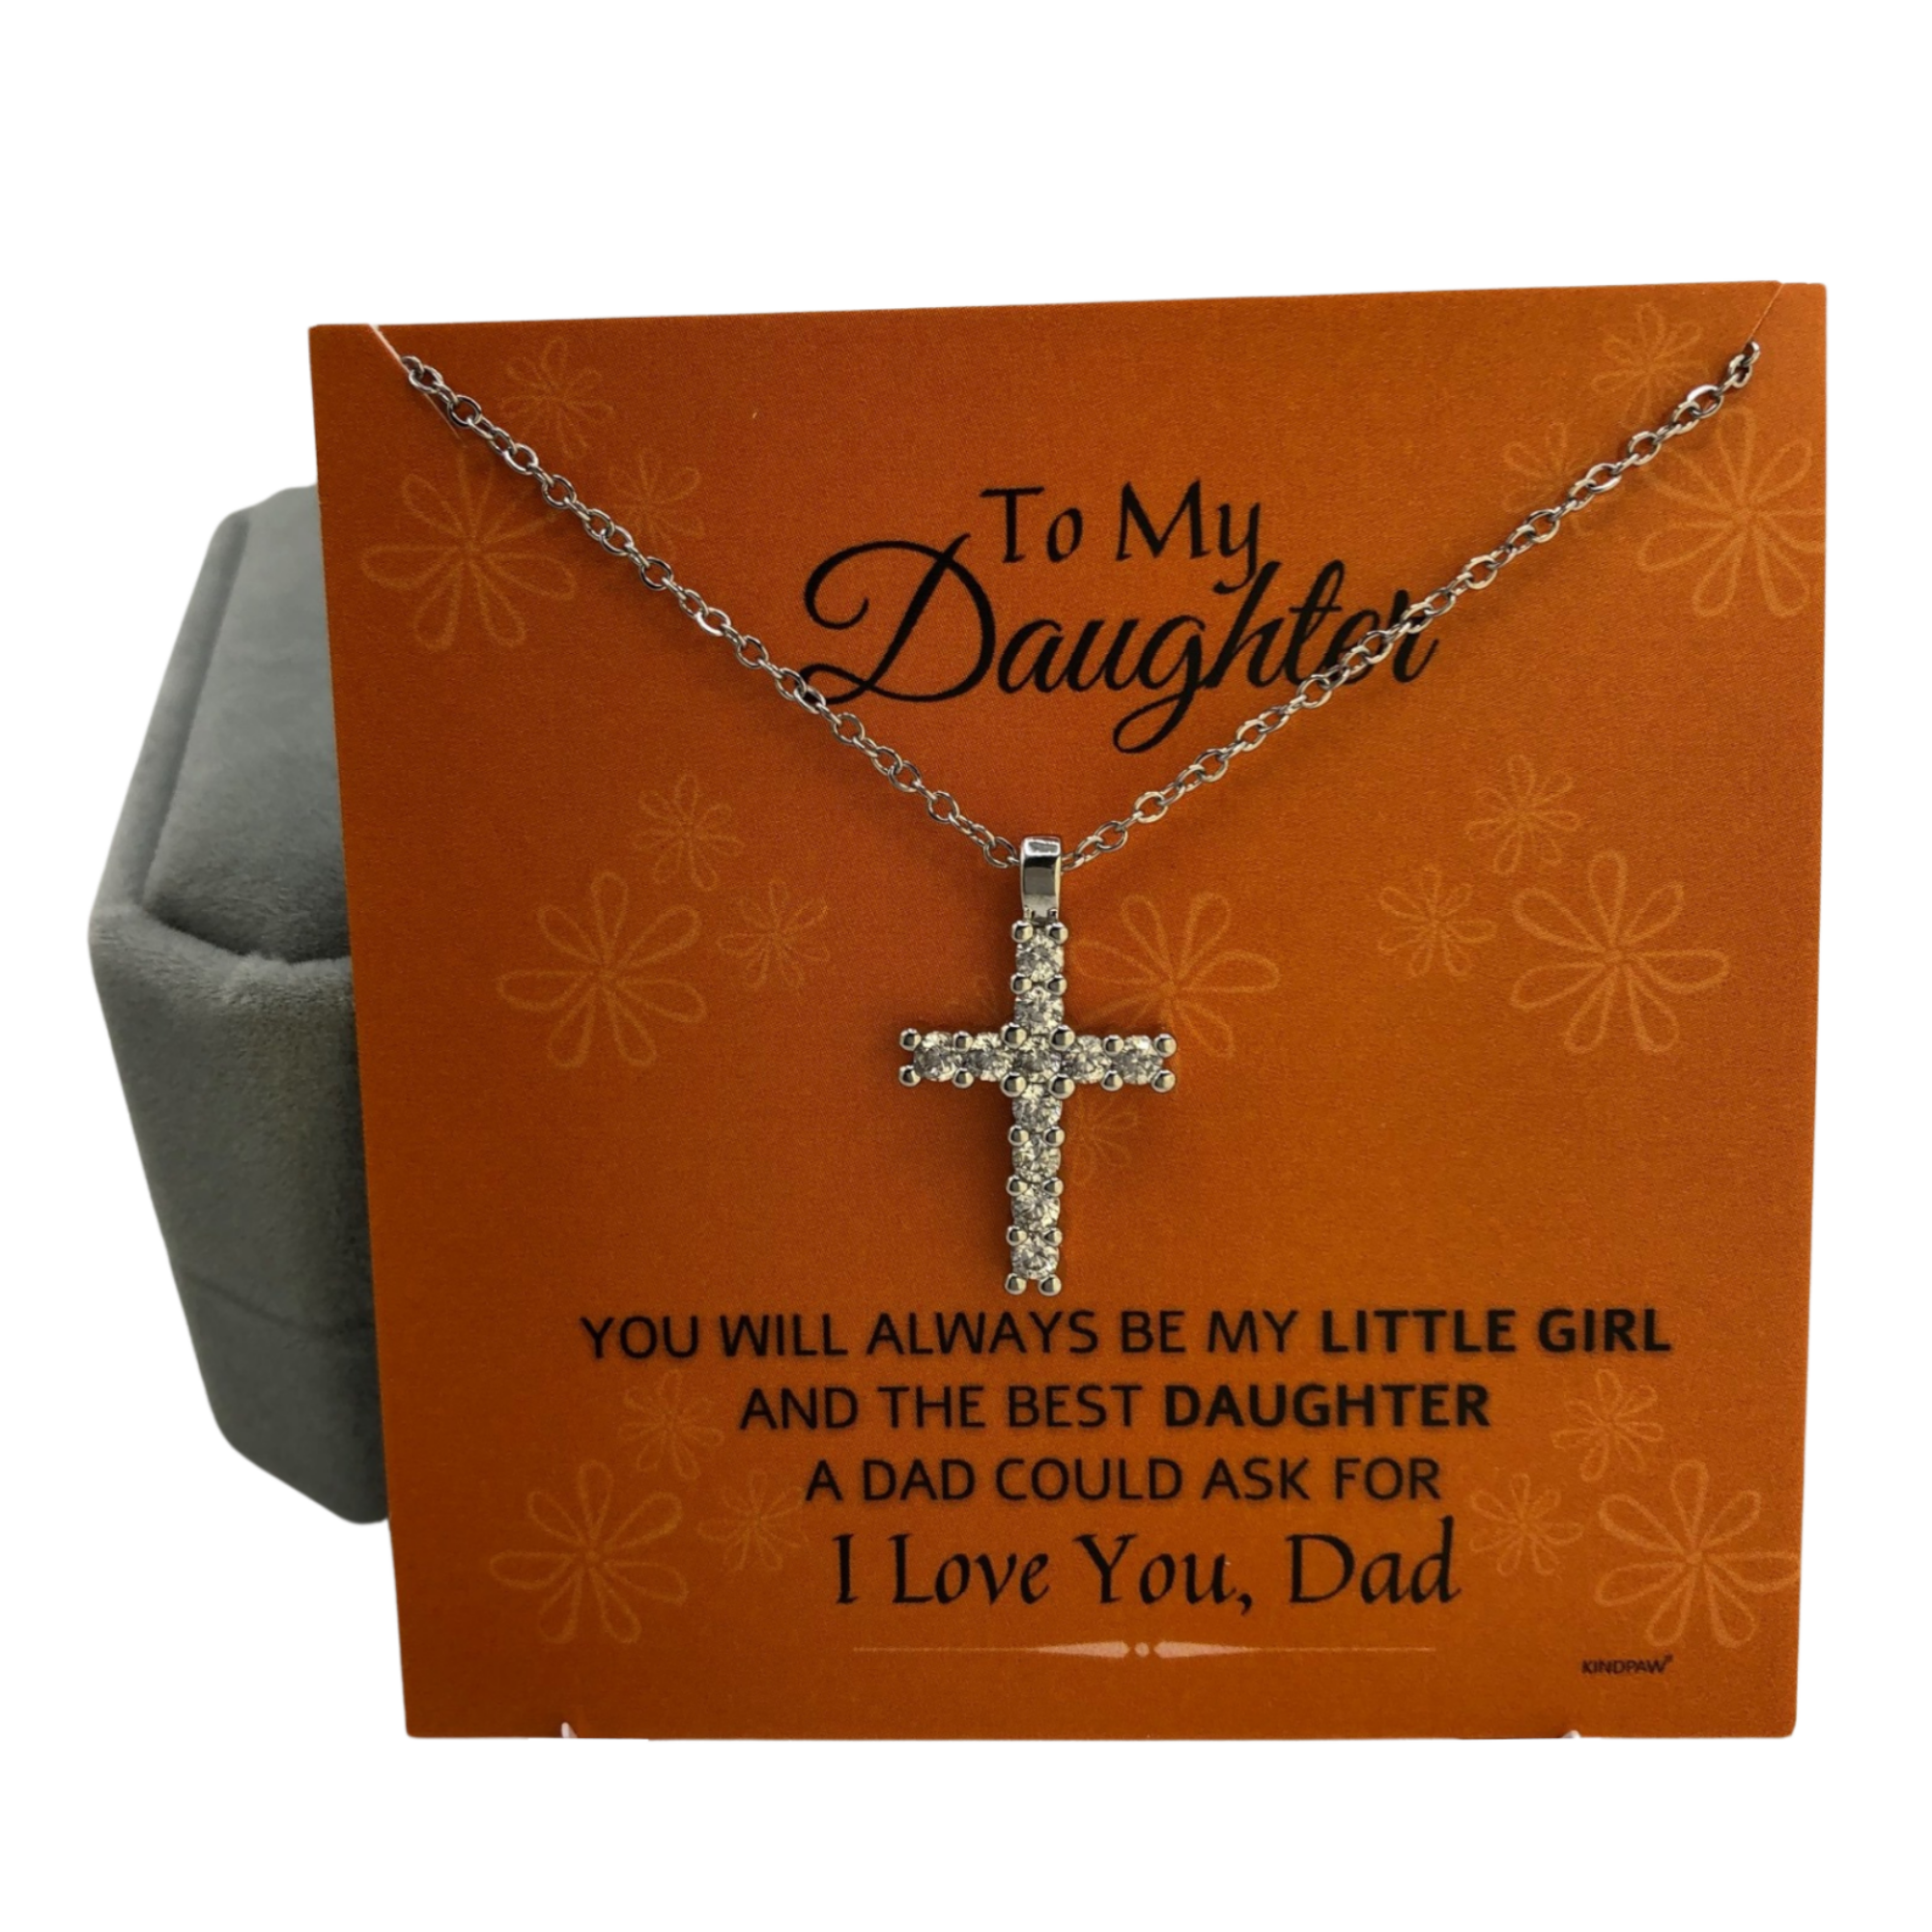 Little Girls Cross Necklace - Cute Cross Pendant Necklace For Daughter From Dad